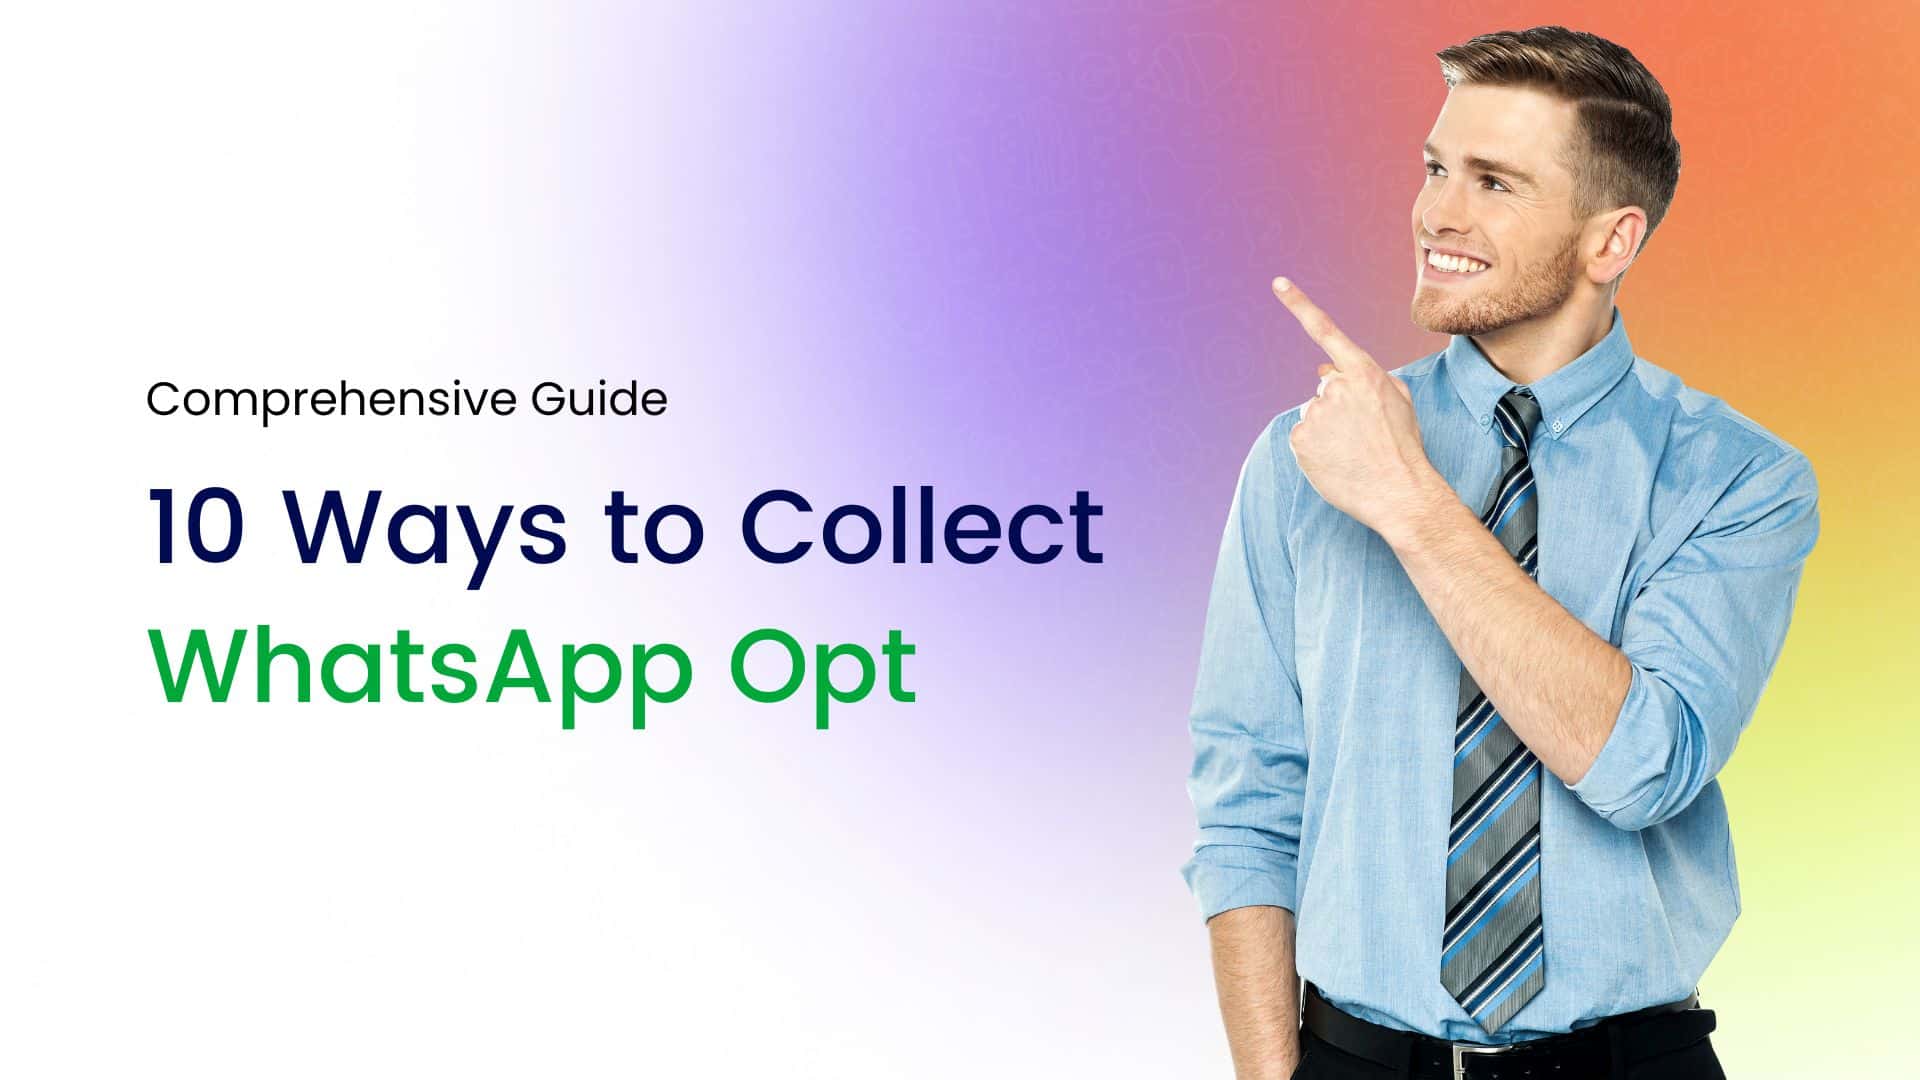 10 Ways to Collect WhatsApp Opt